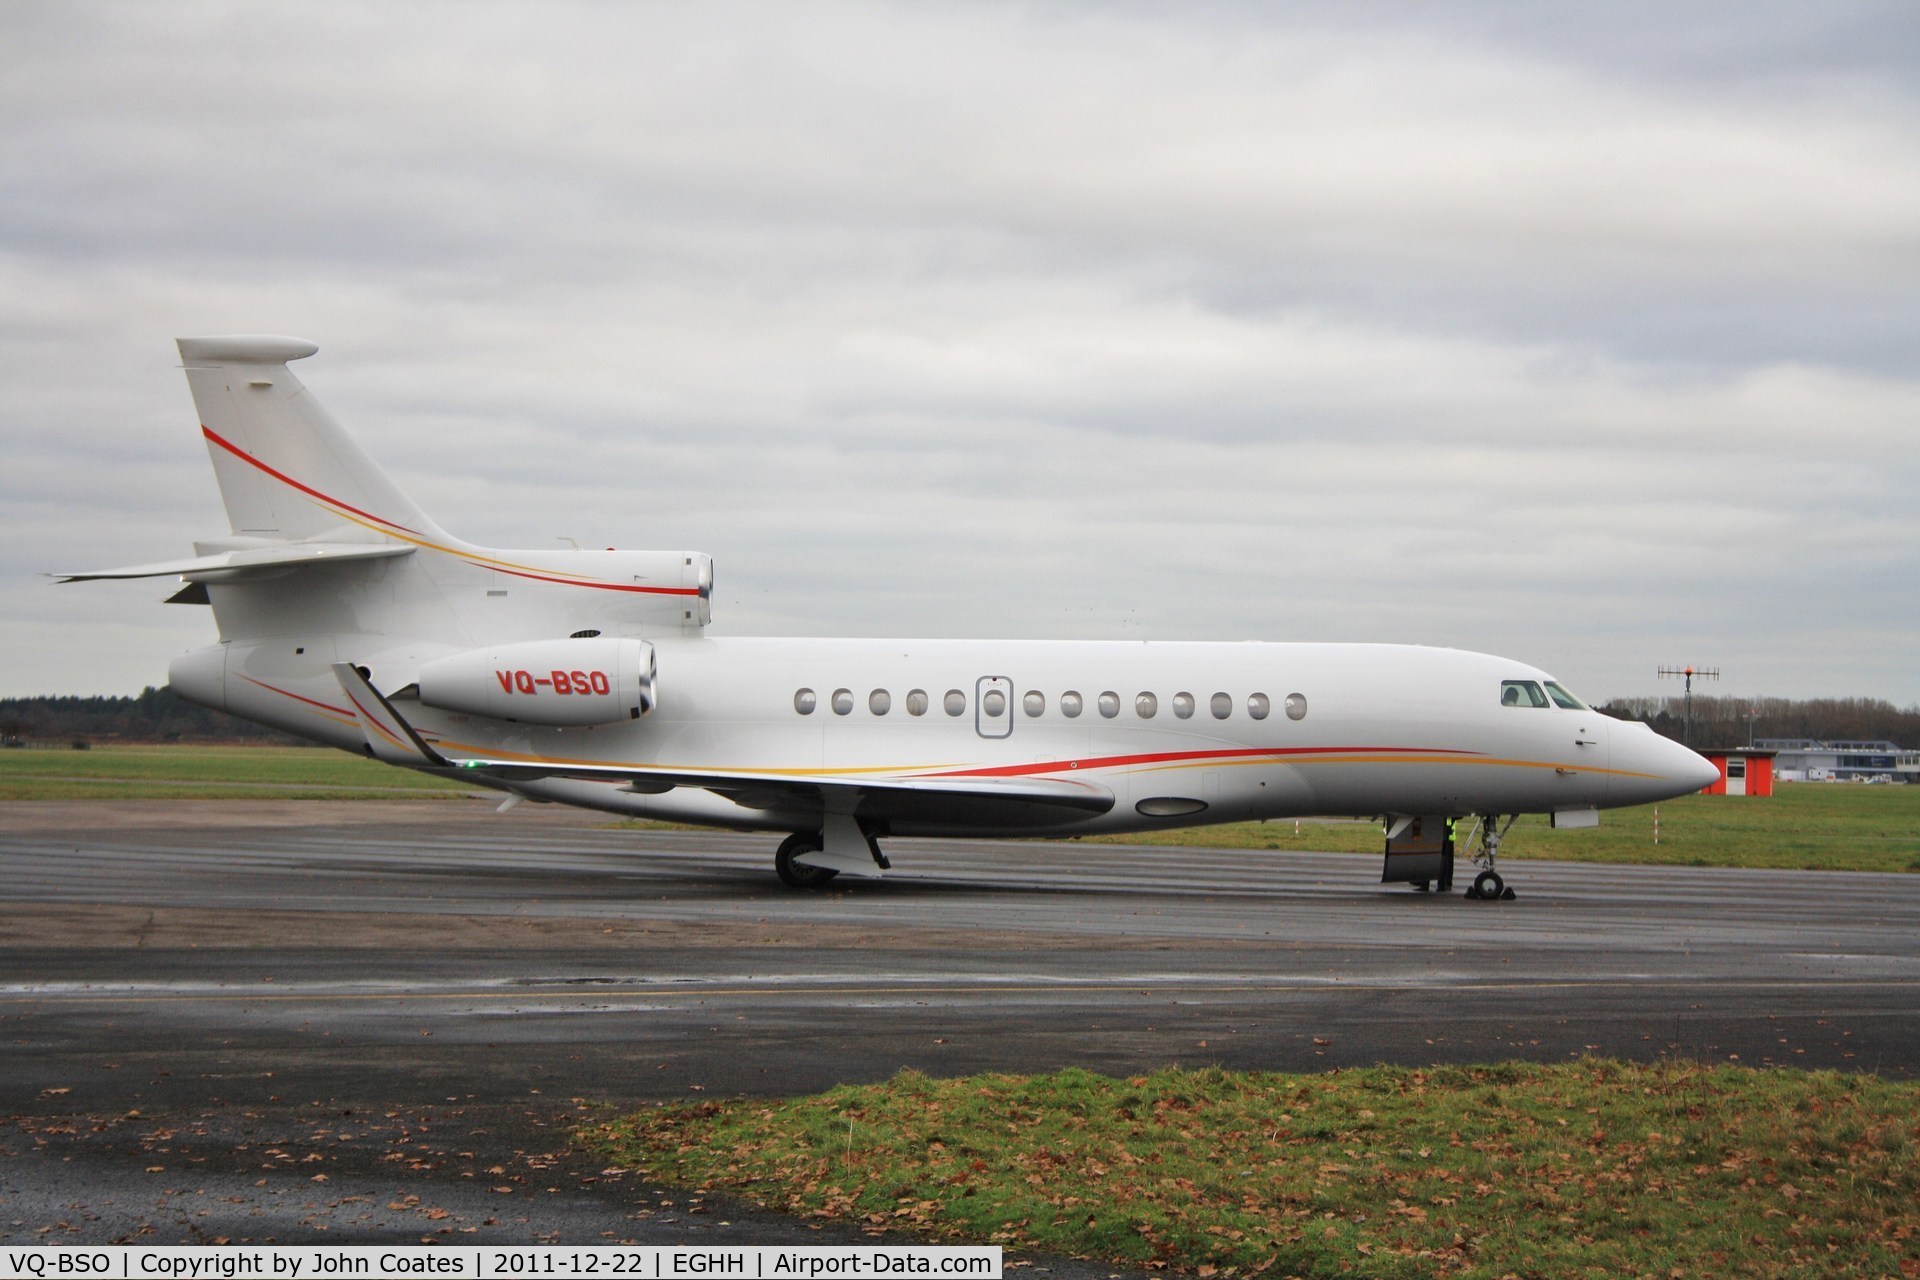 VQ-BSO, 2009 Dassault Falcon 7X C/N 064, At Sigs